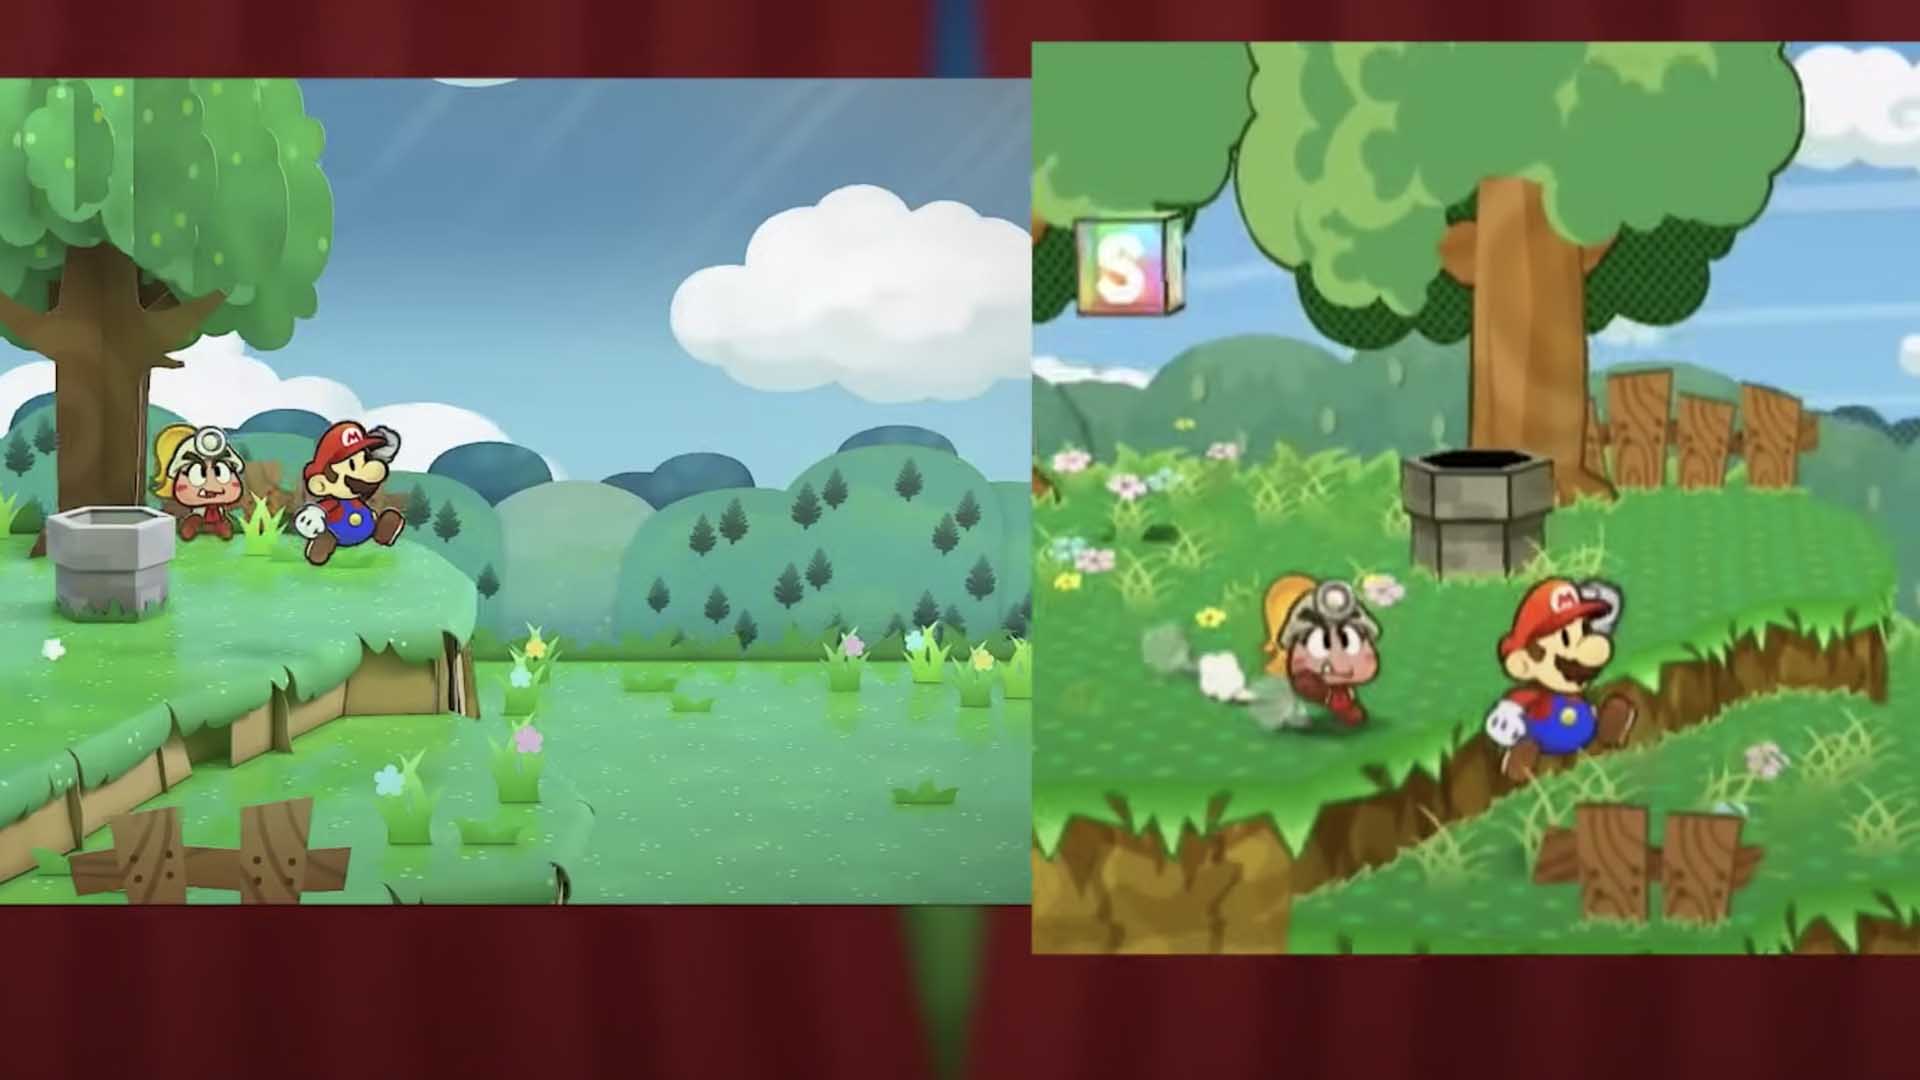 Paper Mario: The Thousand-Year Door release date speculation